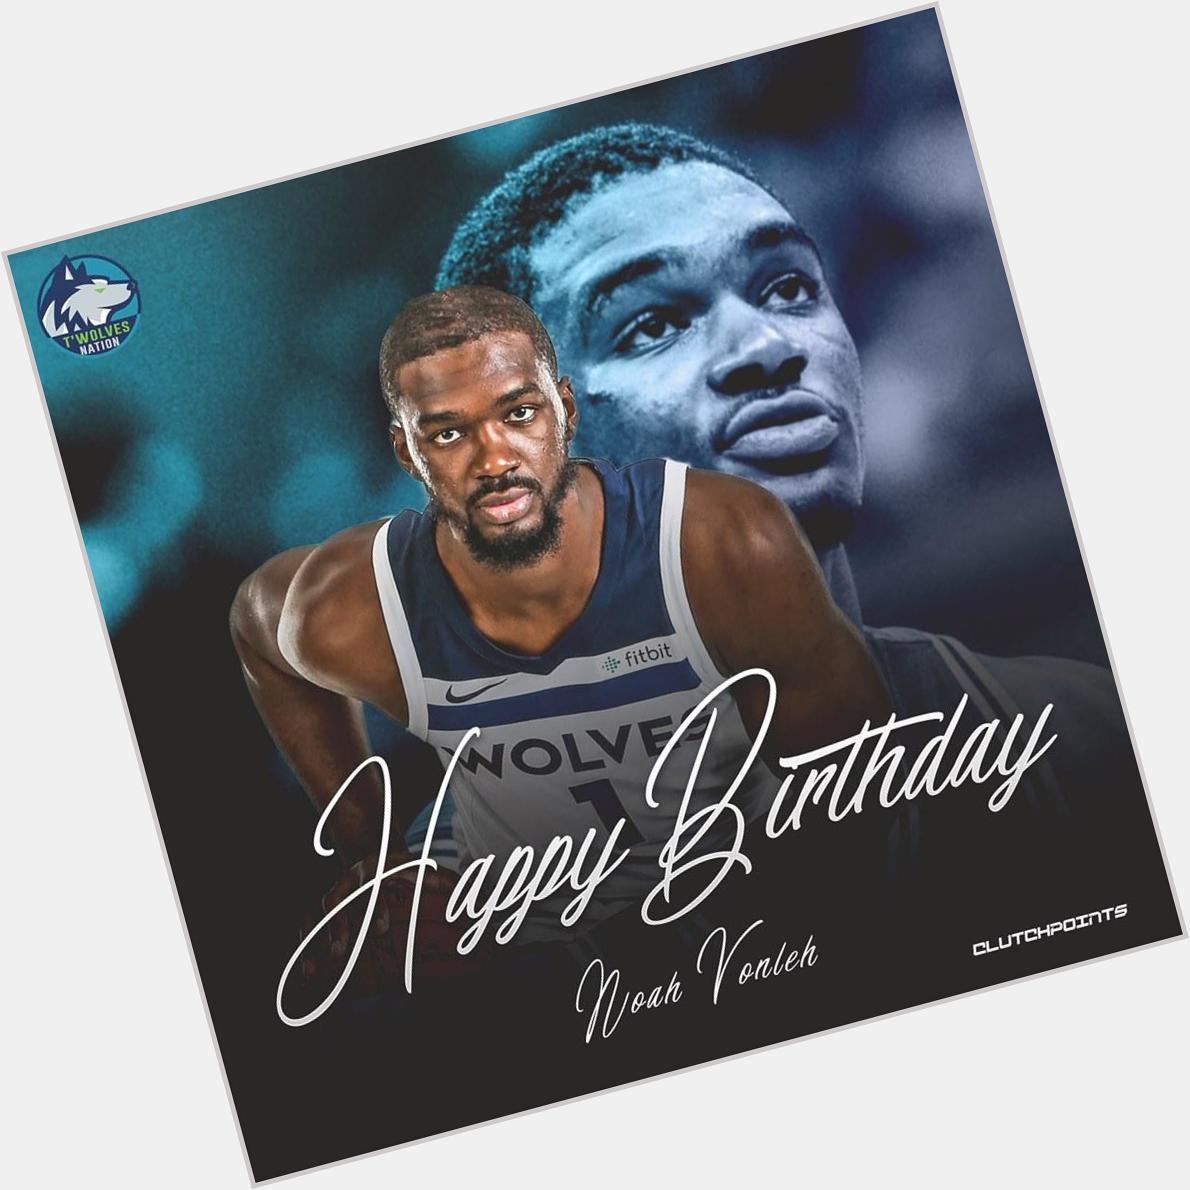 Join Timberwolves Nation in wishing Noah Vonleh a happy 24th birthday!   